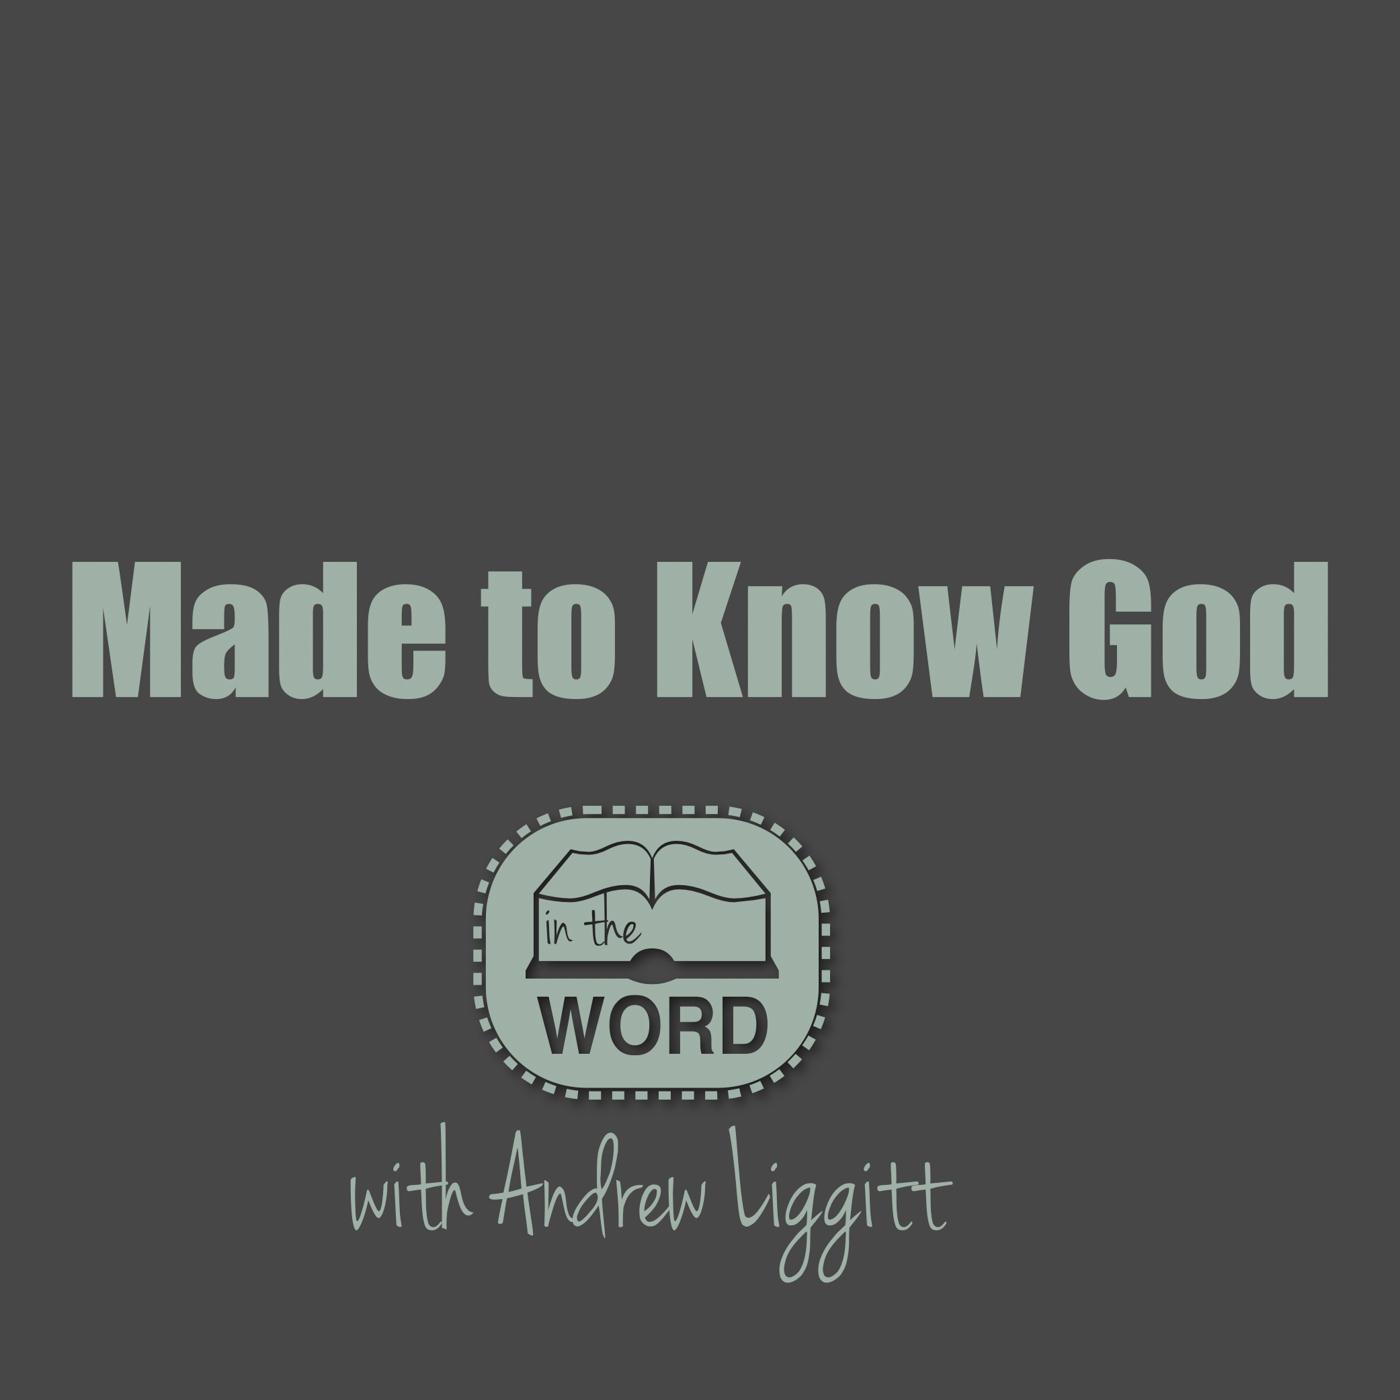 Made to Know God